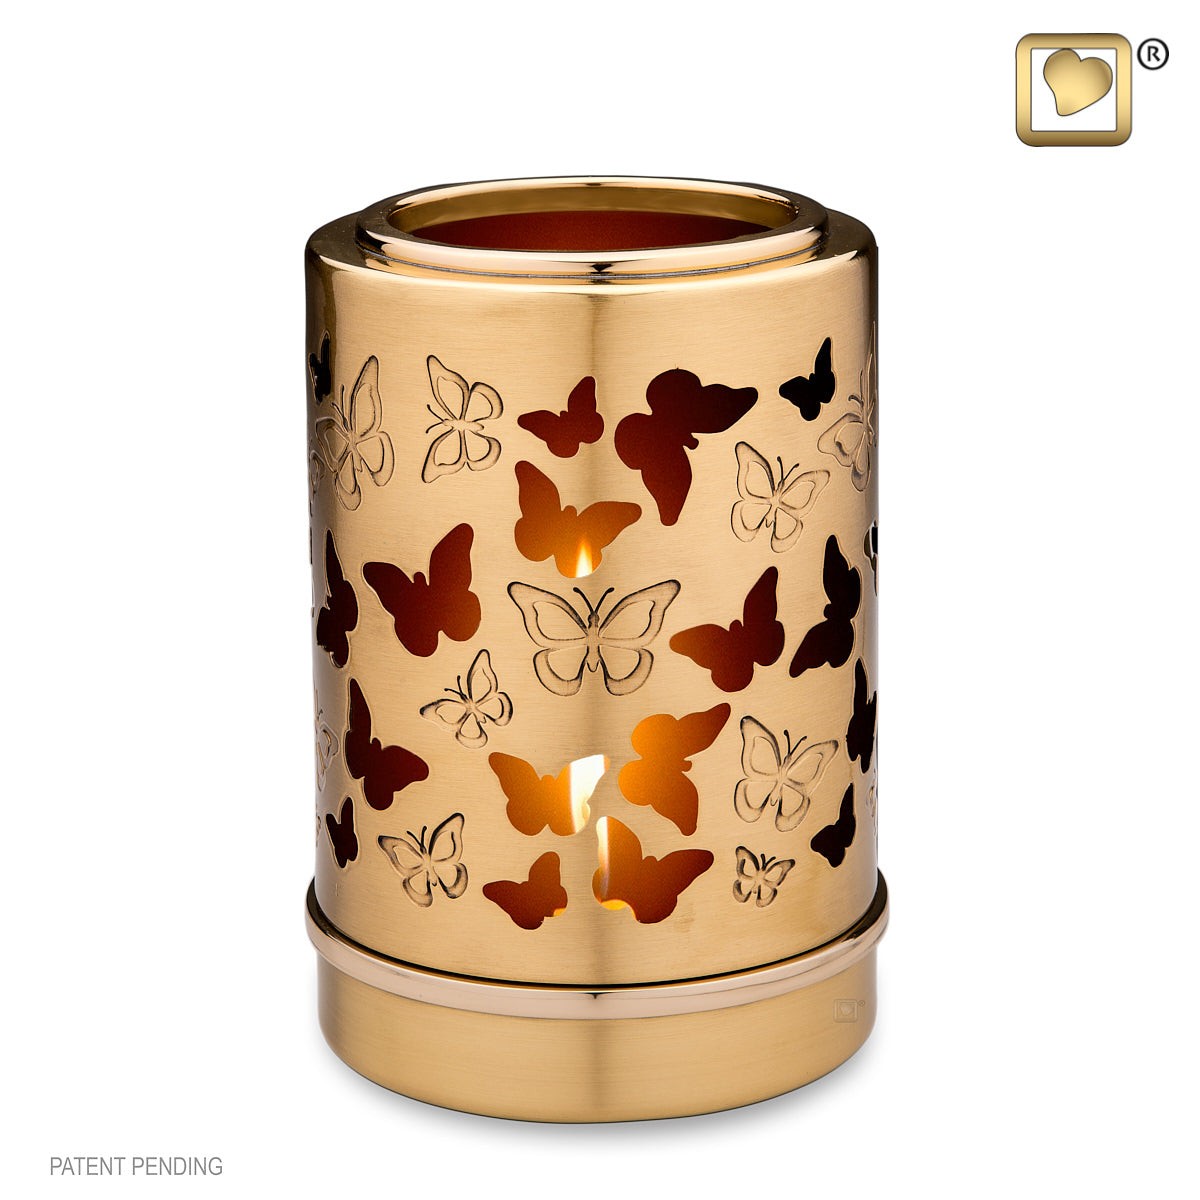 Reflections of Life (Tealight Urn)